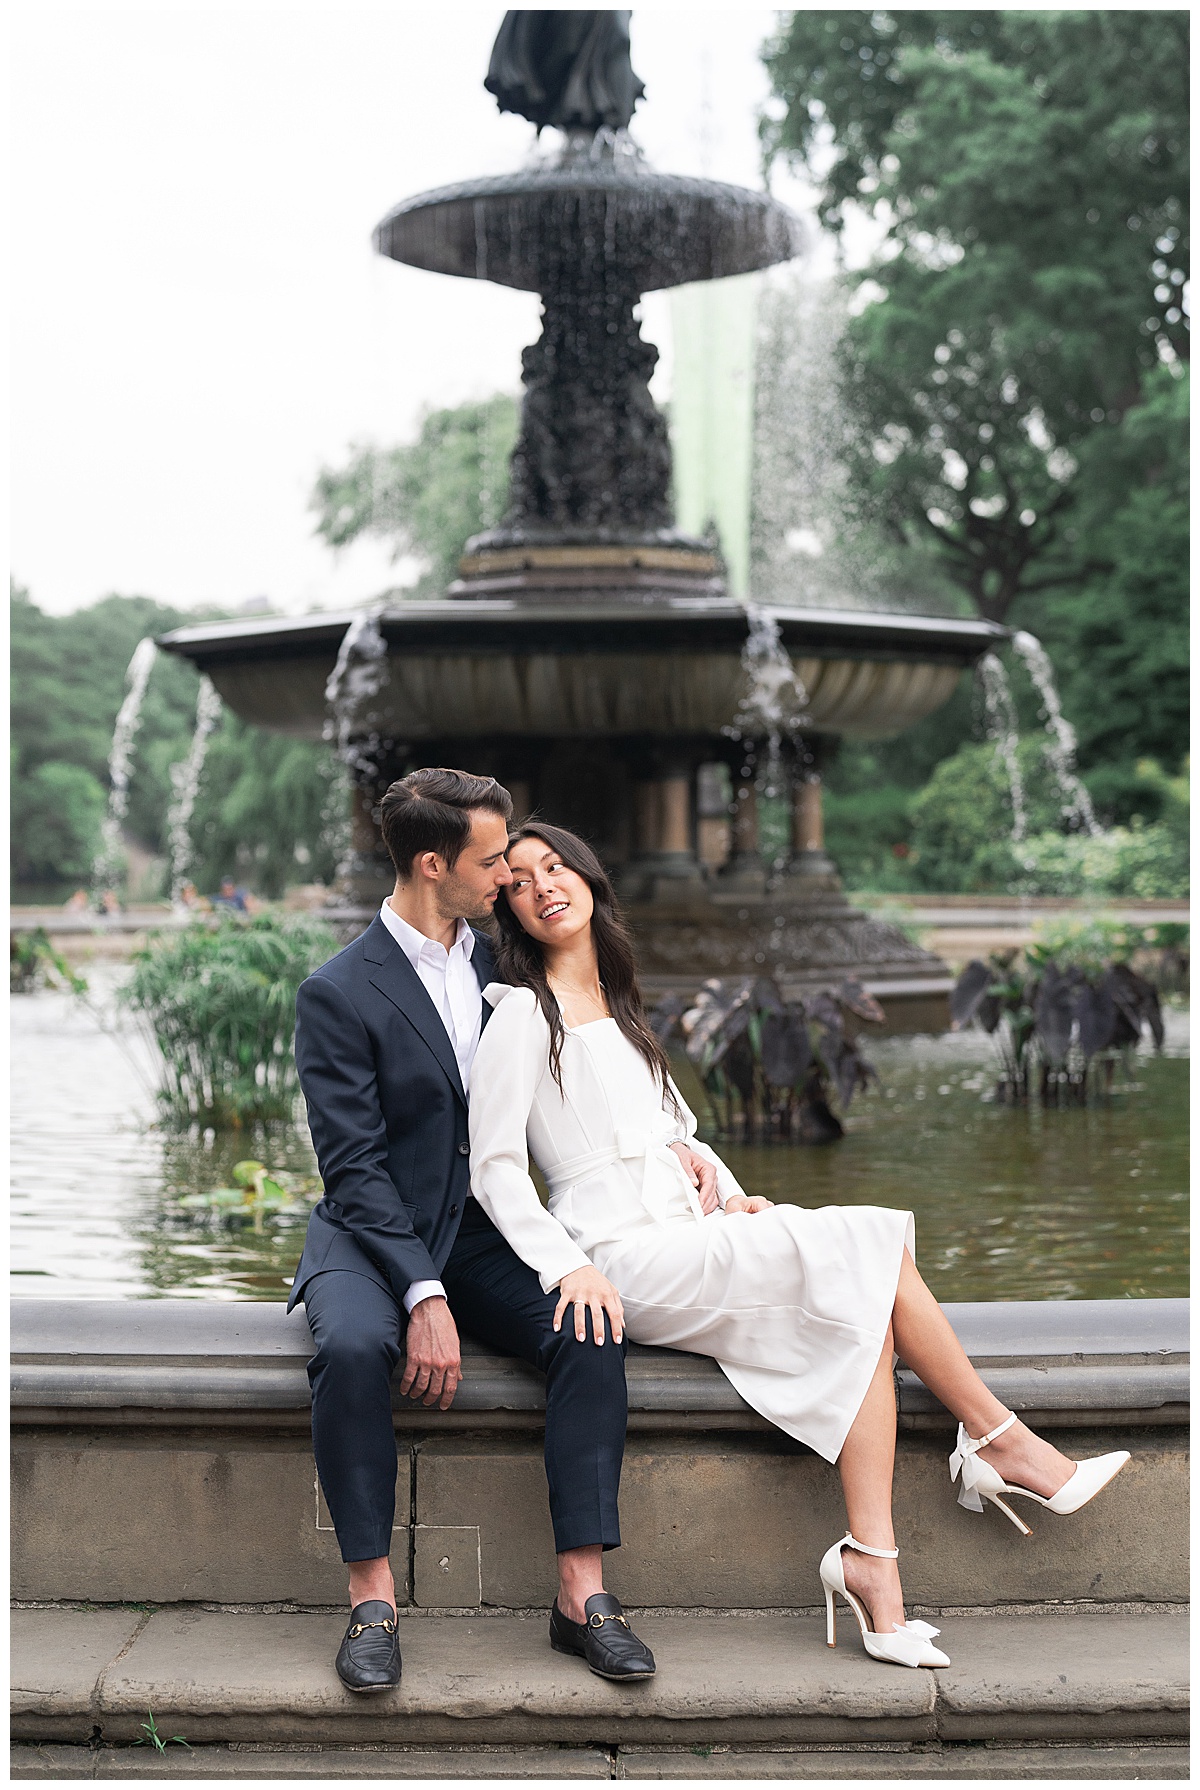 Man and woman cuddle in close together near a fountain during their Destination Engagement Session